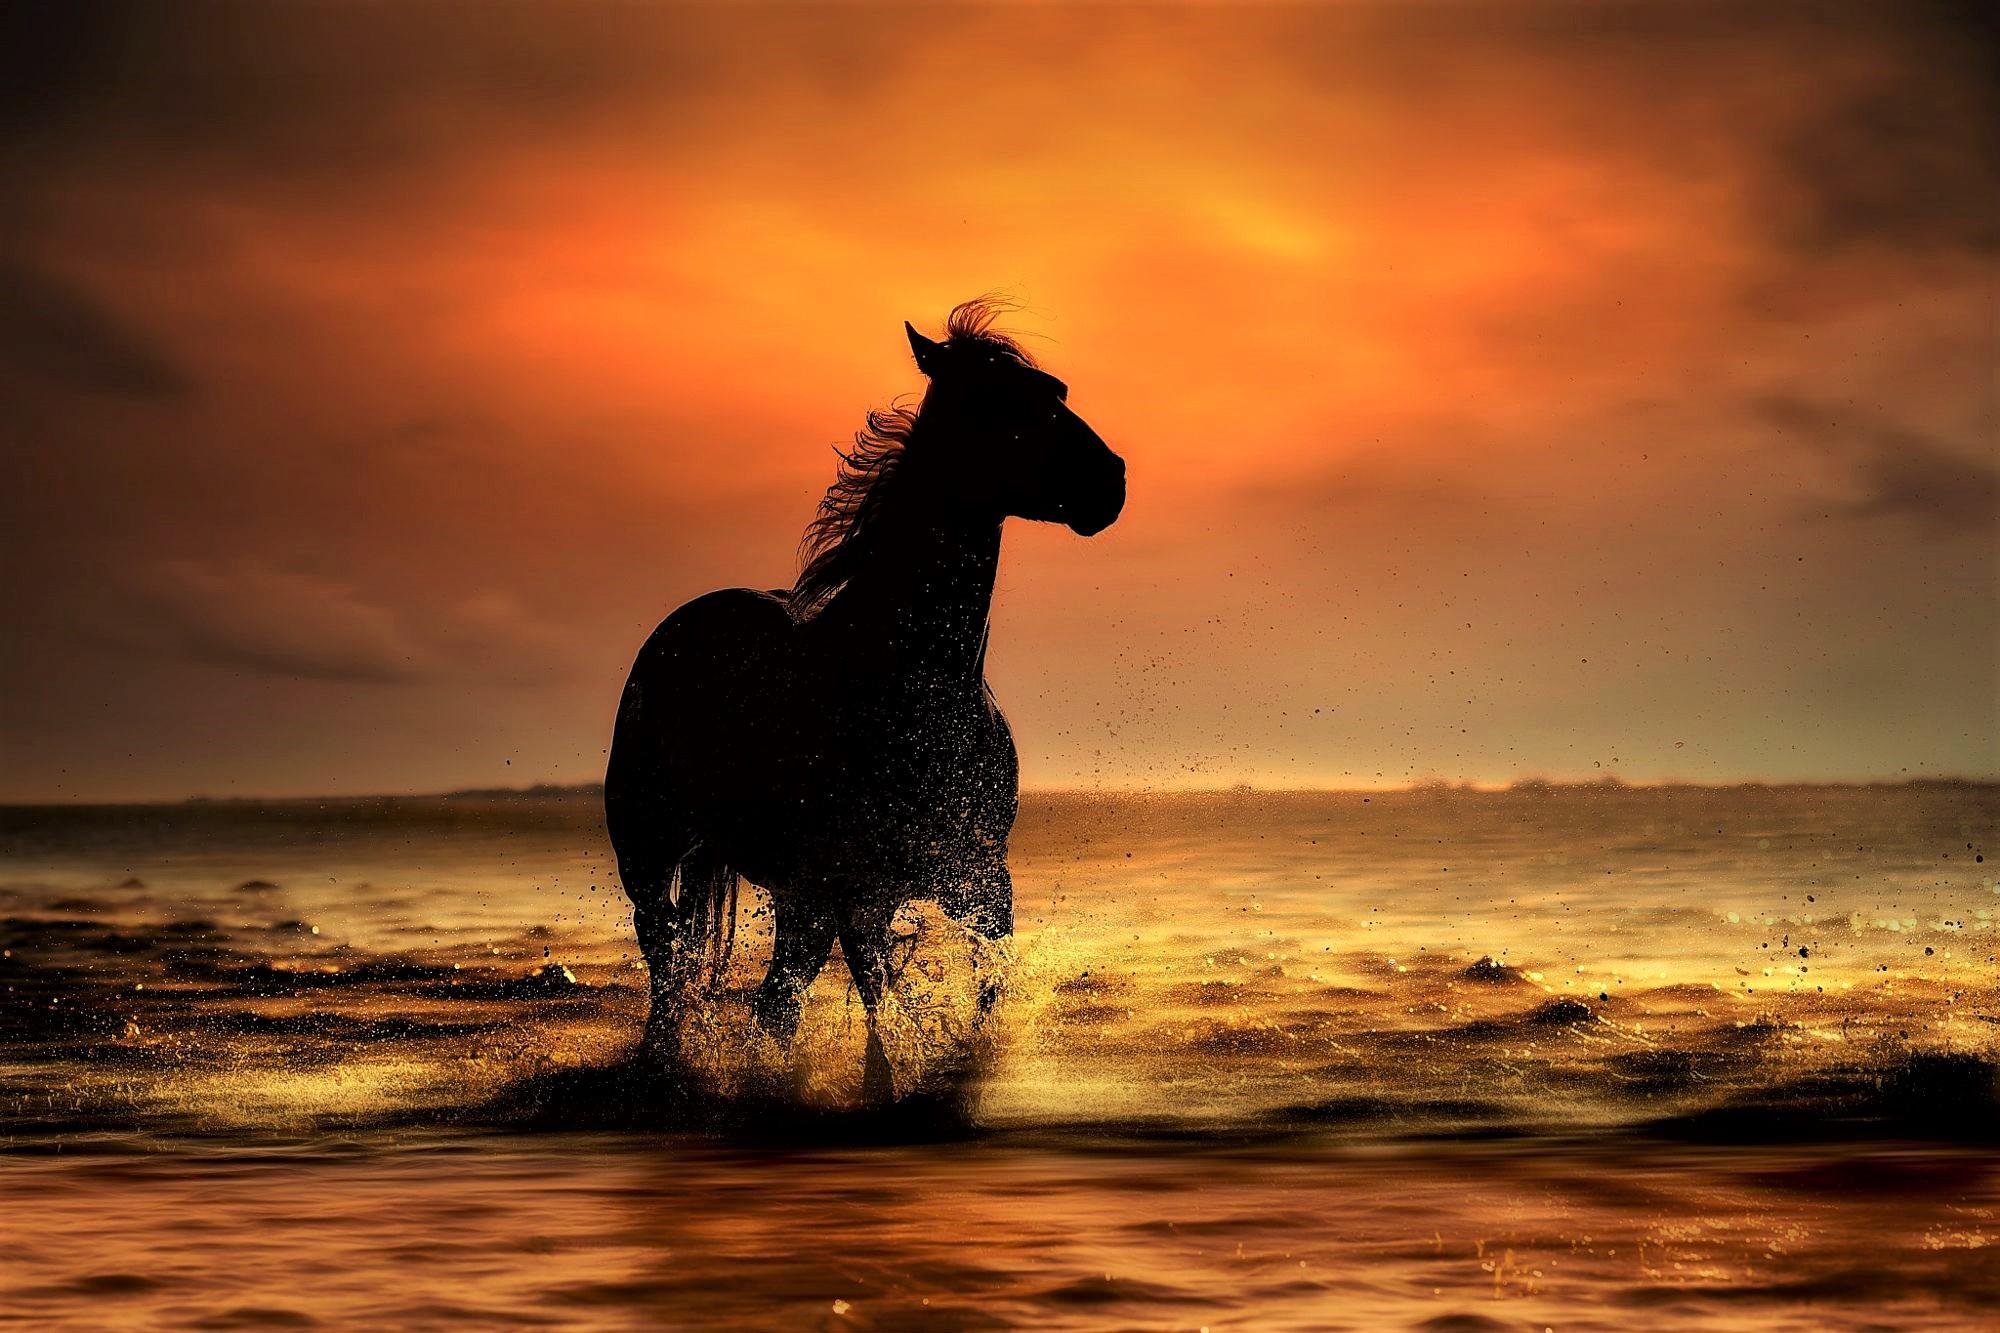 Horse In The Ocean At Sunset By Nikos Bantouvakis